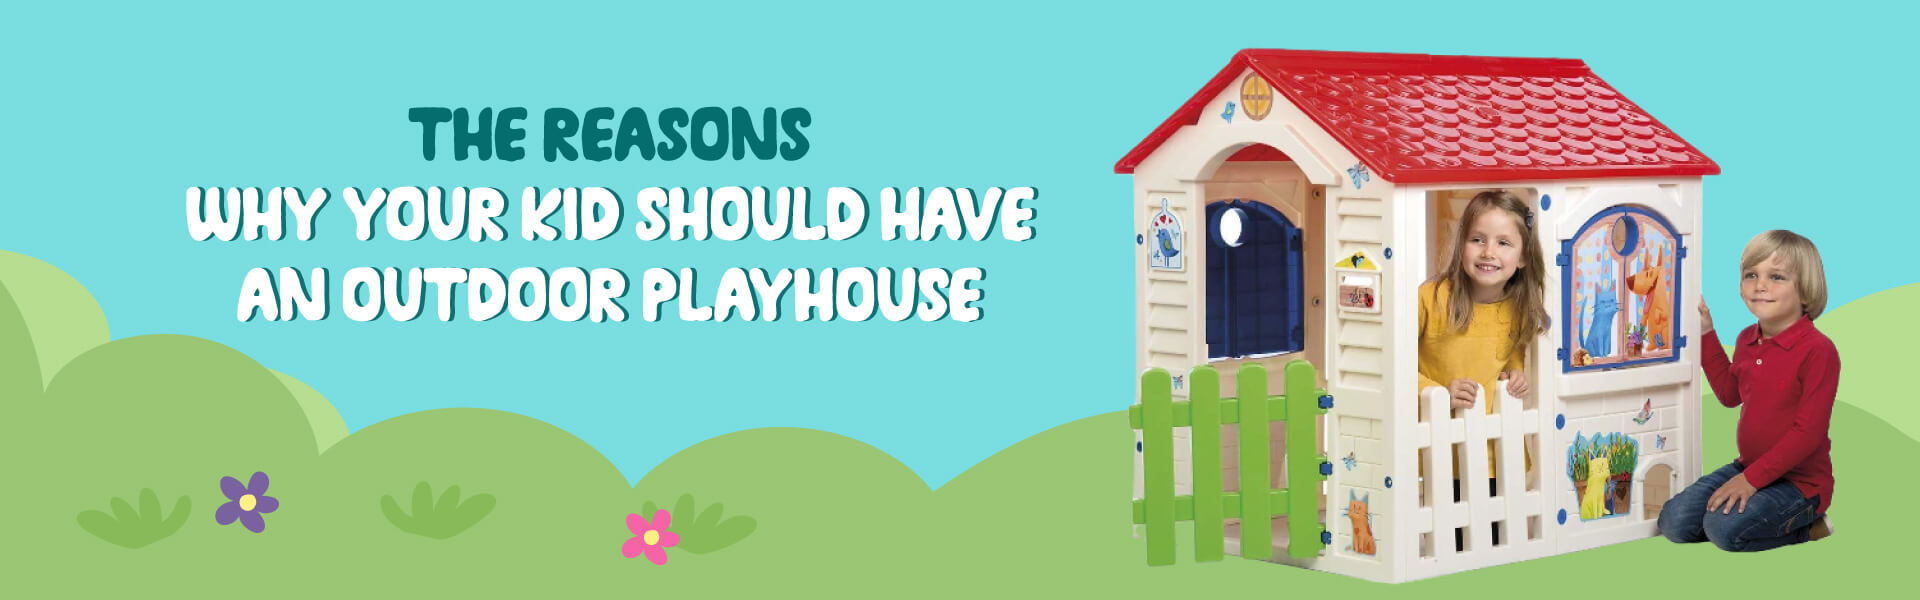 reasons why your kid should have an outdoor playhouse